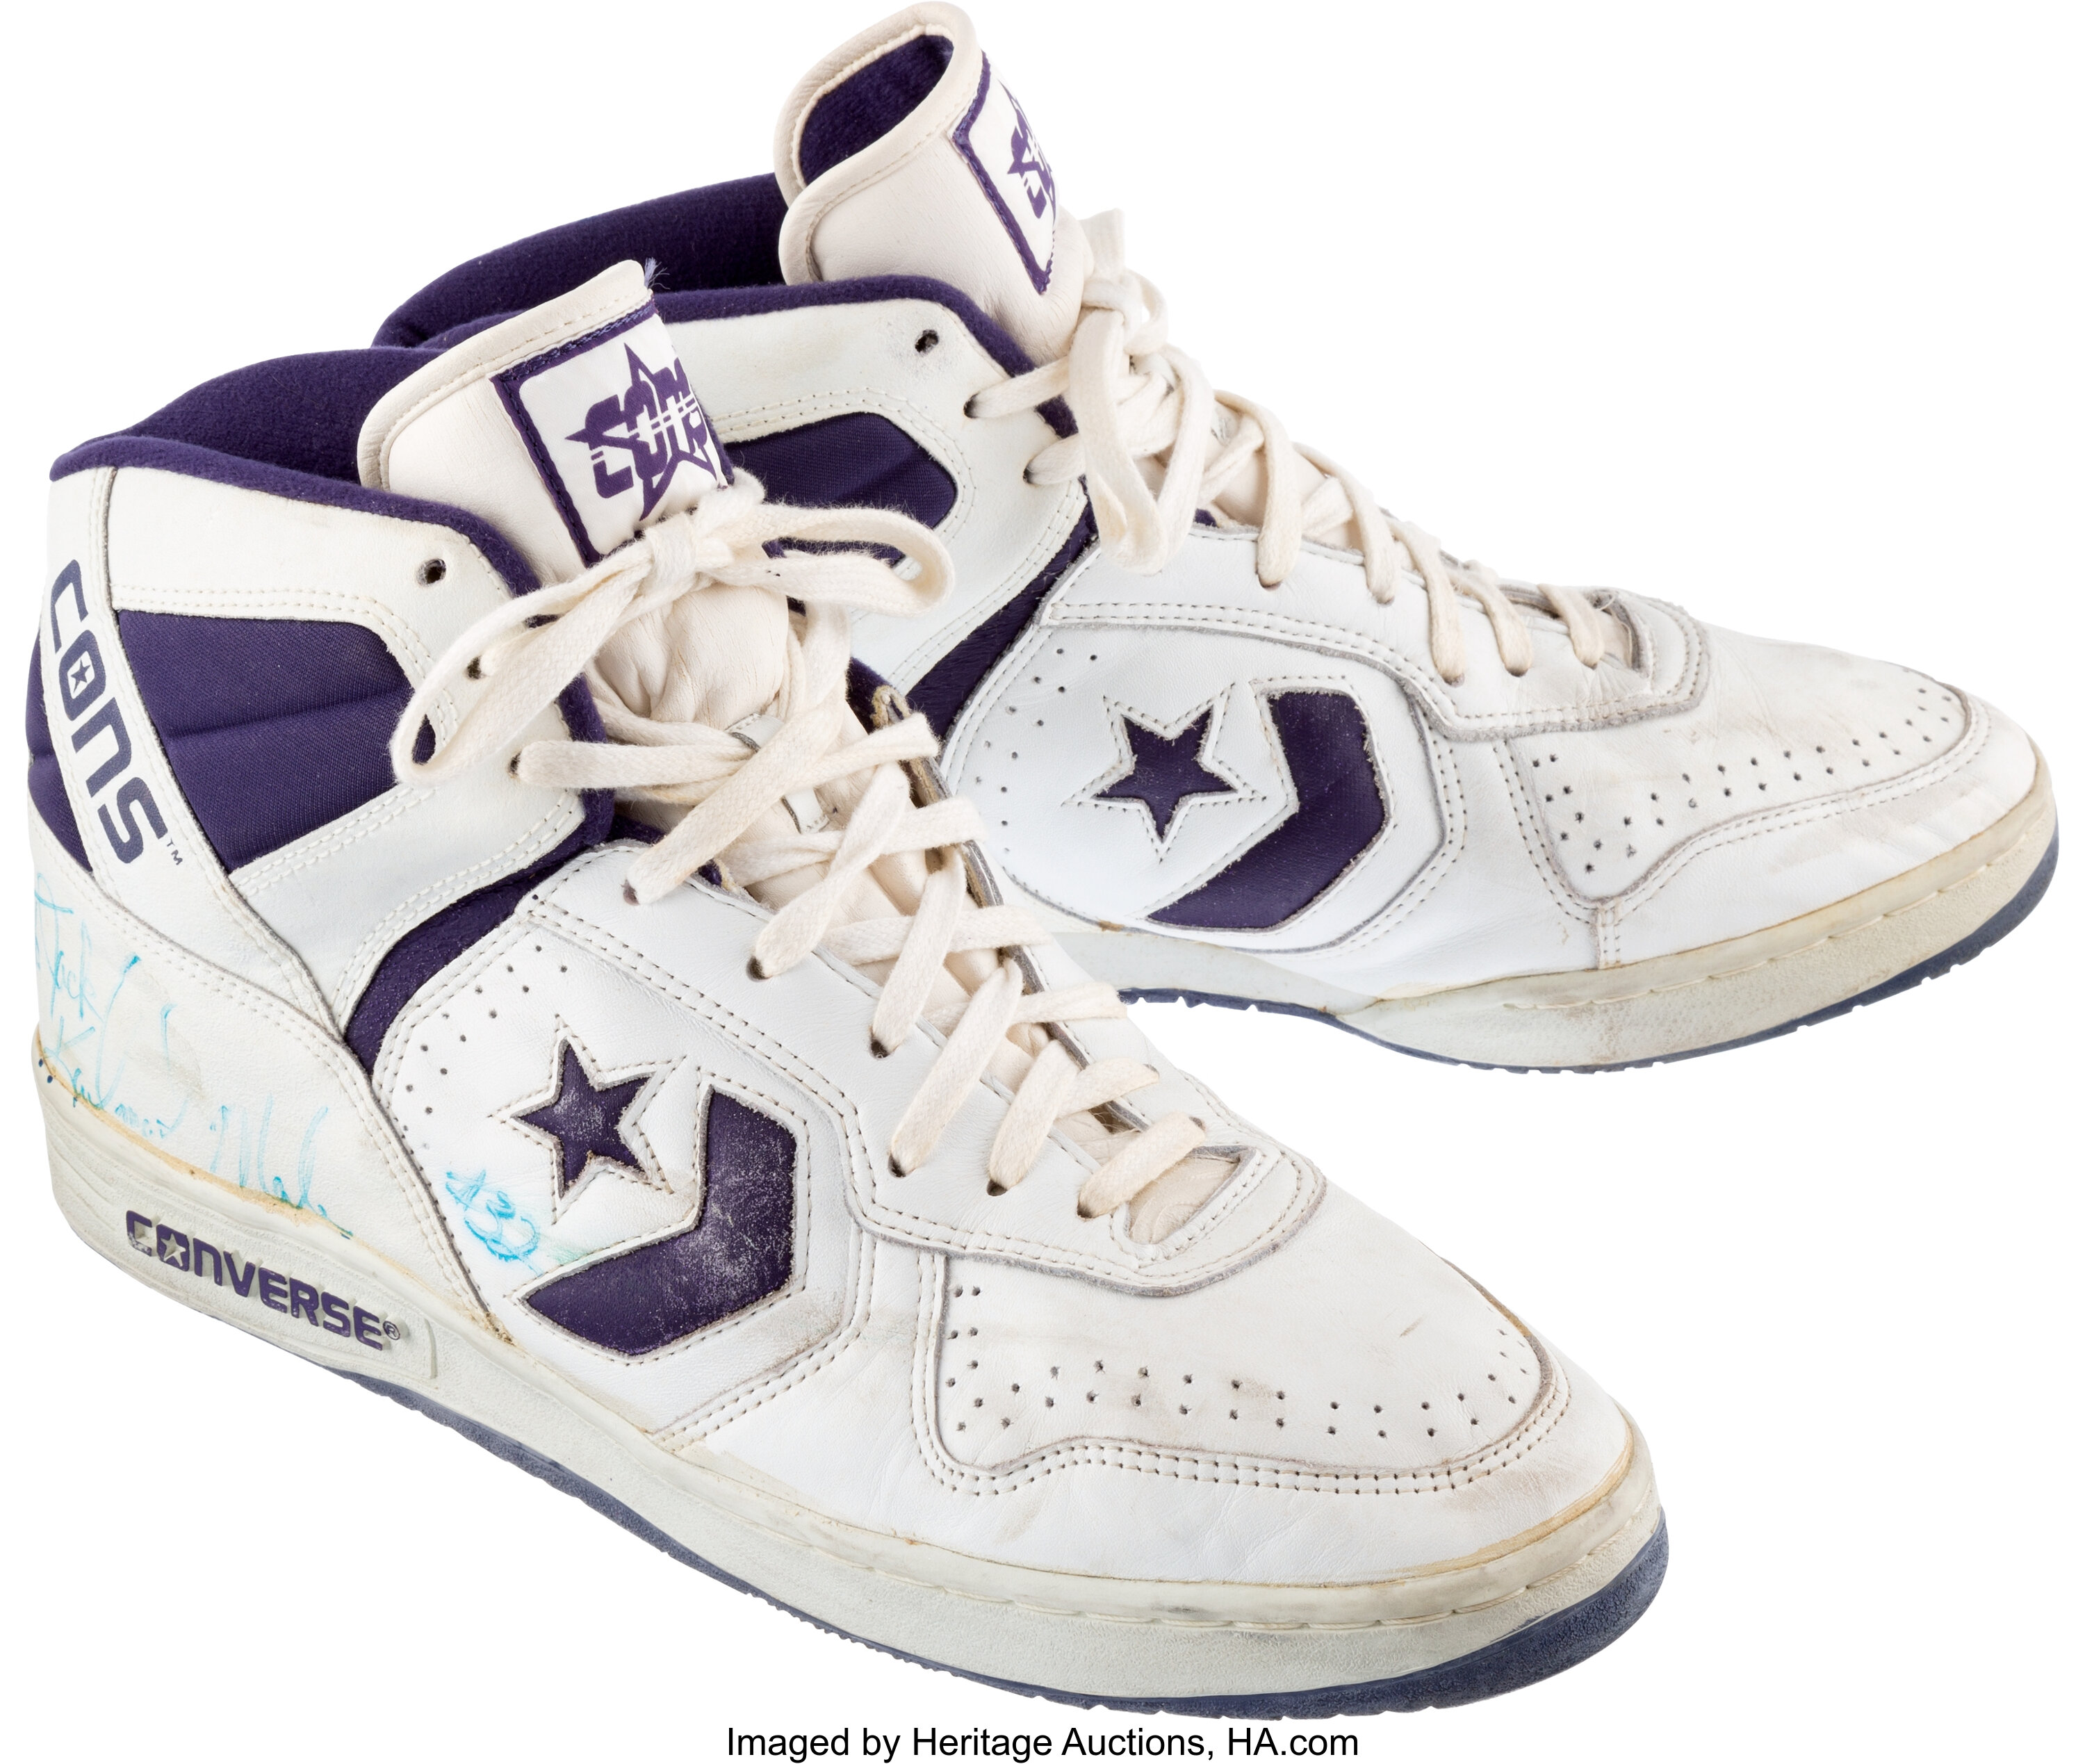 1980's Karl Malone Signed Game Worn Sneakers.... Basketball | Lot #53096 |  Heritage Auctions